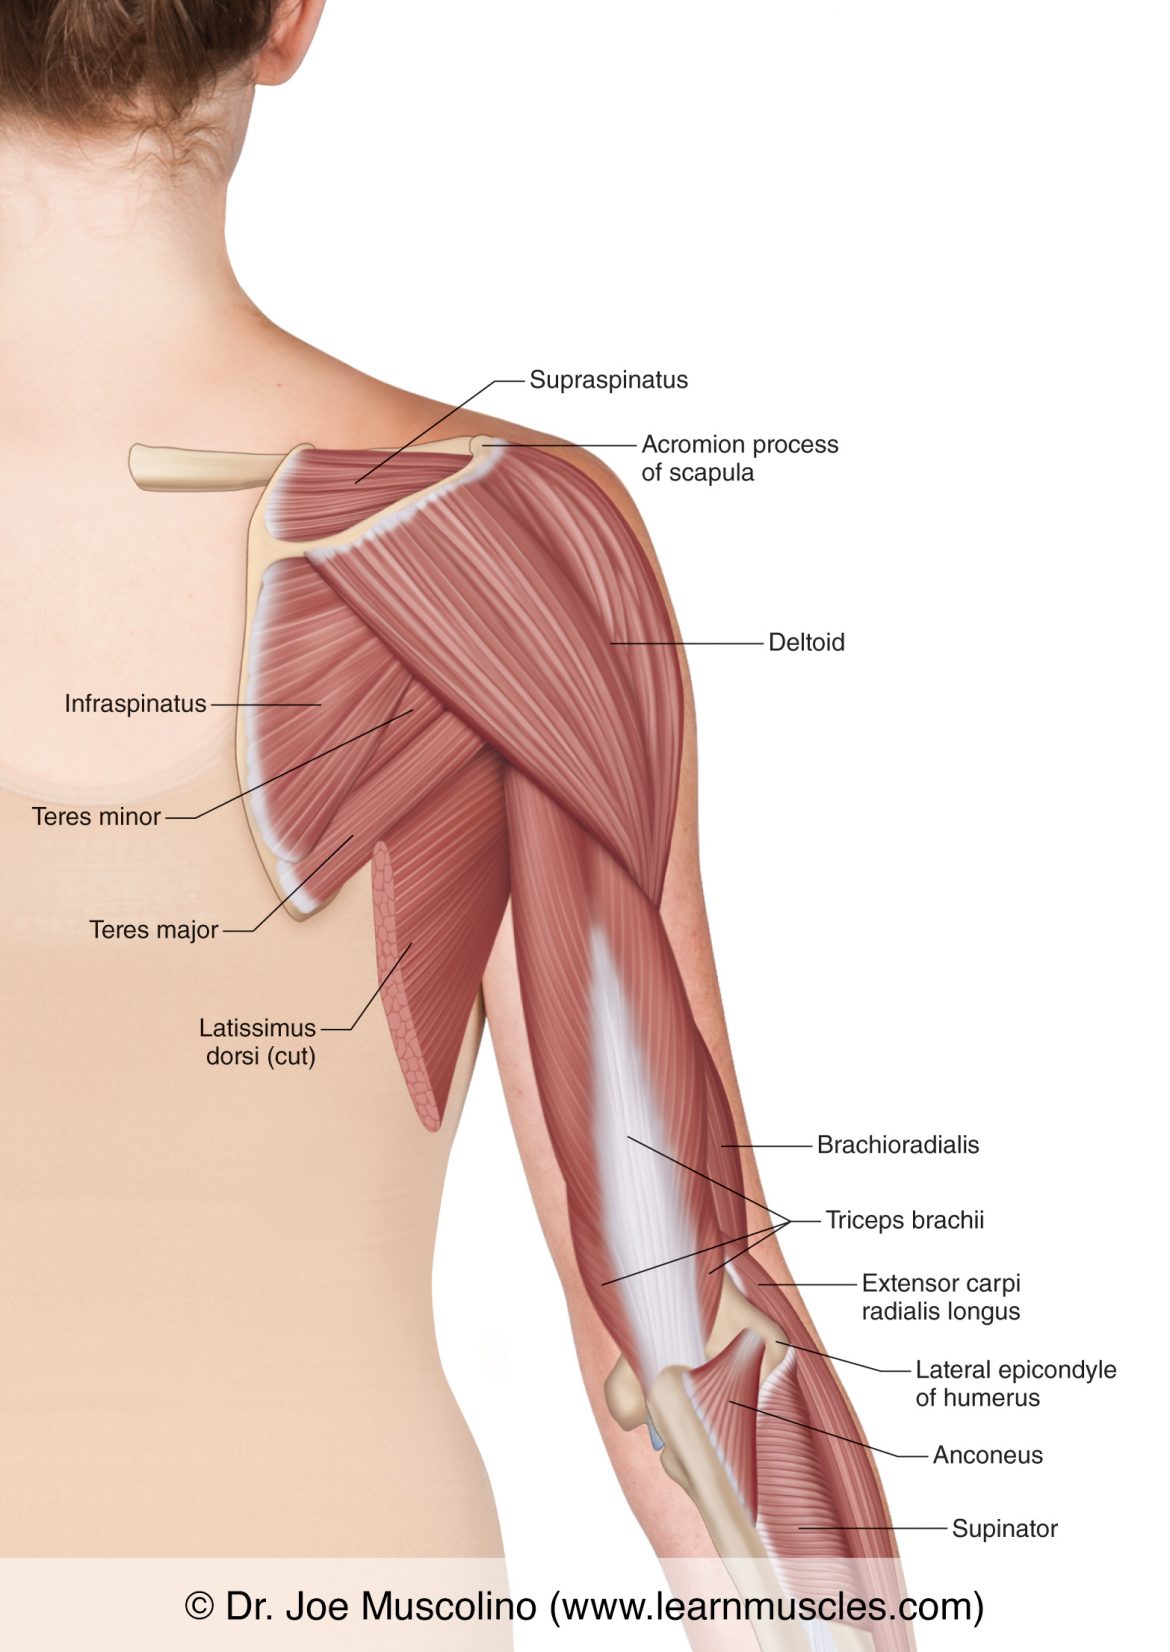 Muscles of the Posterior Arm Superficial View Learn Muscles